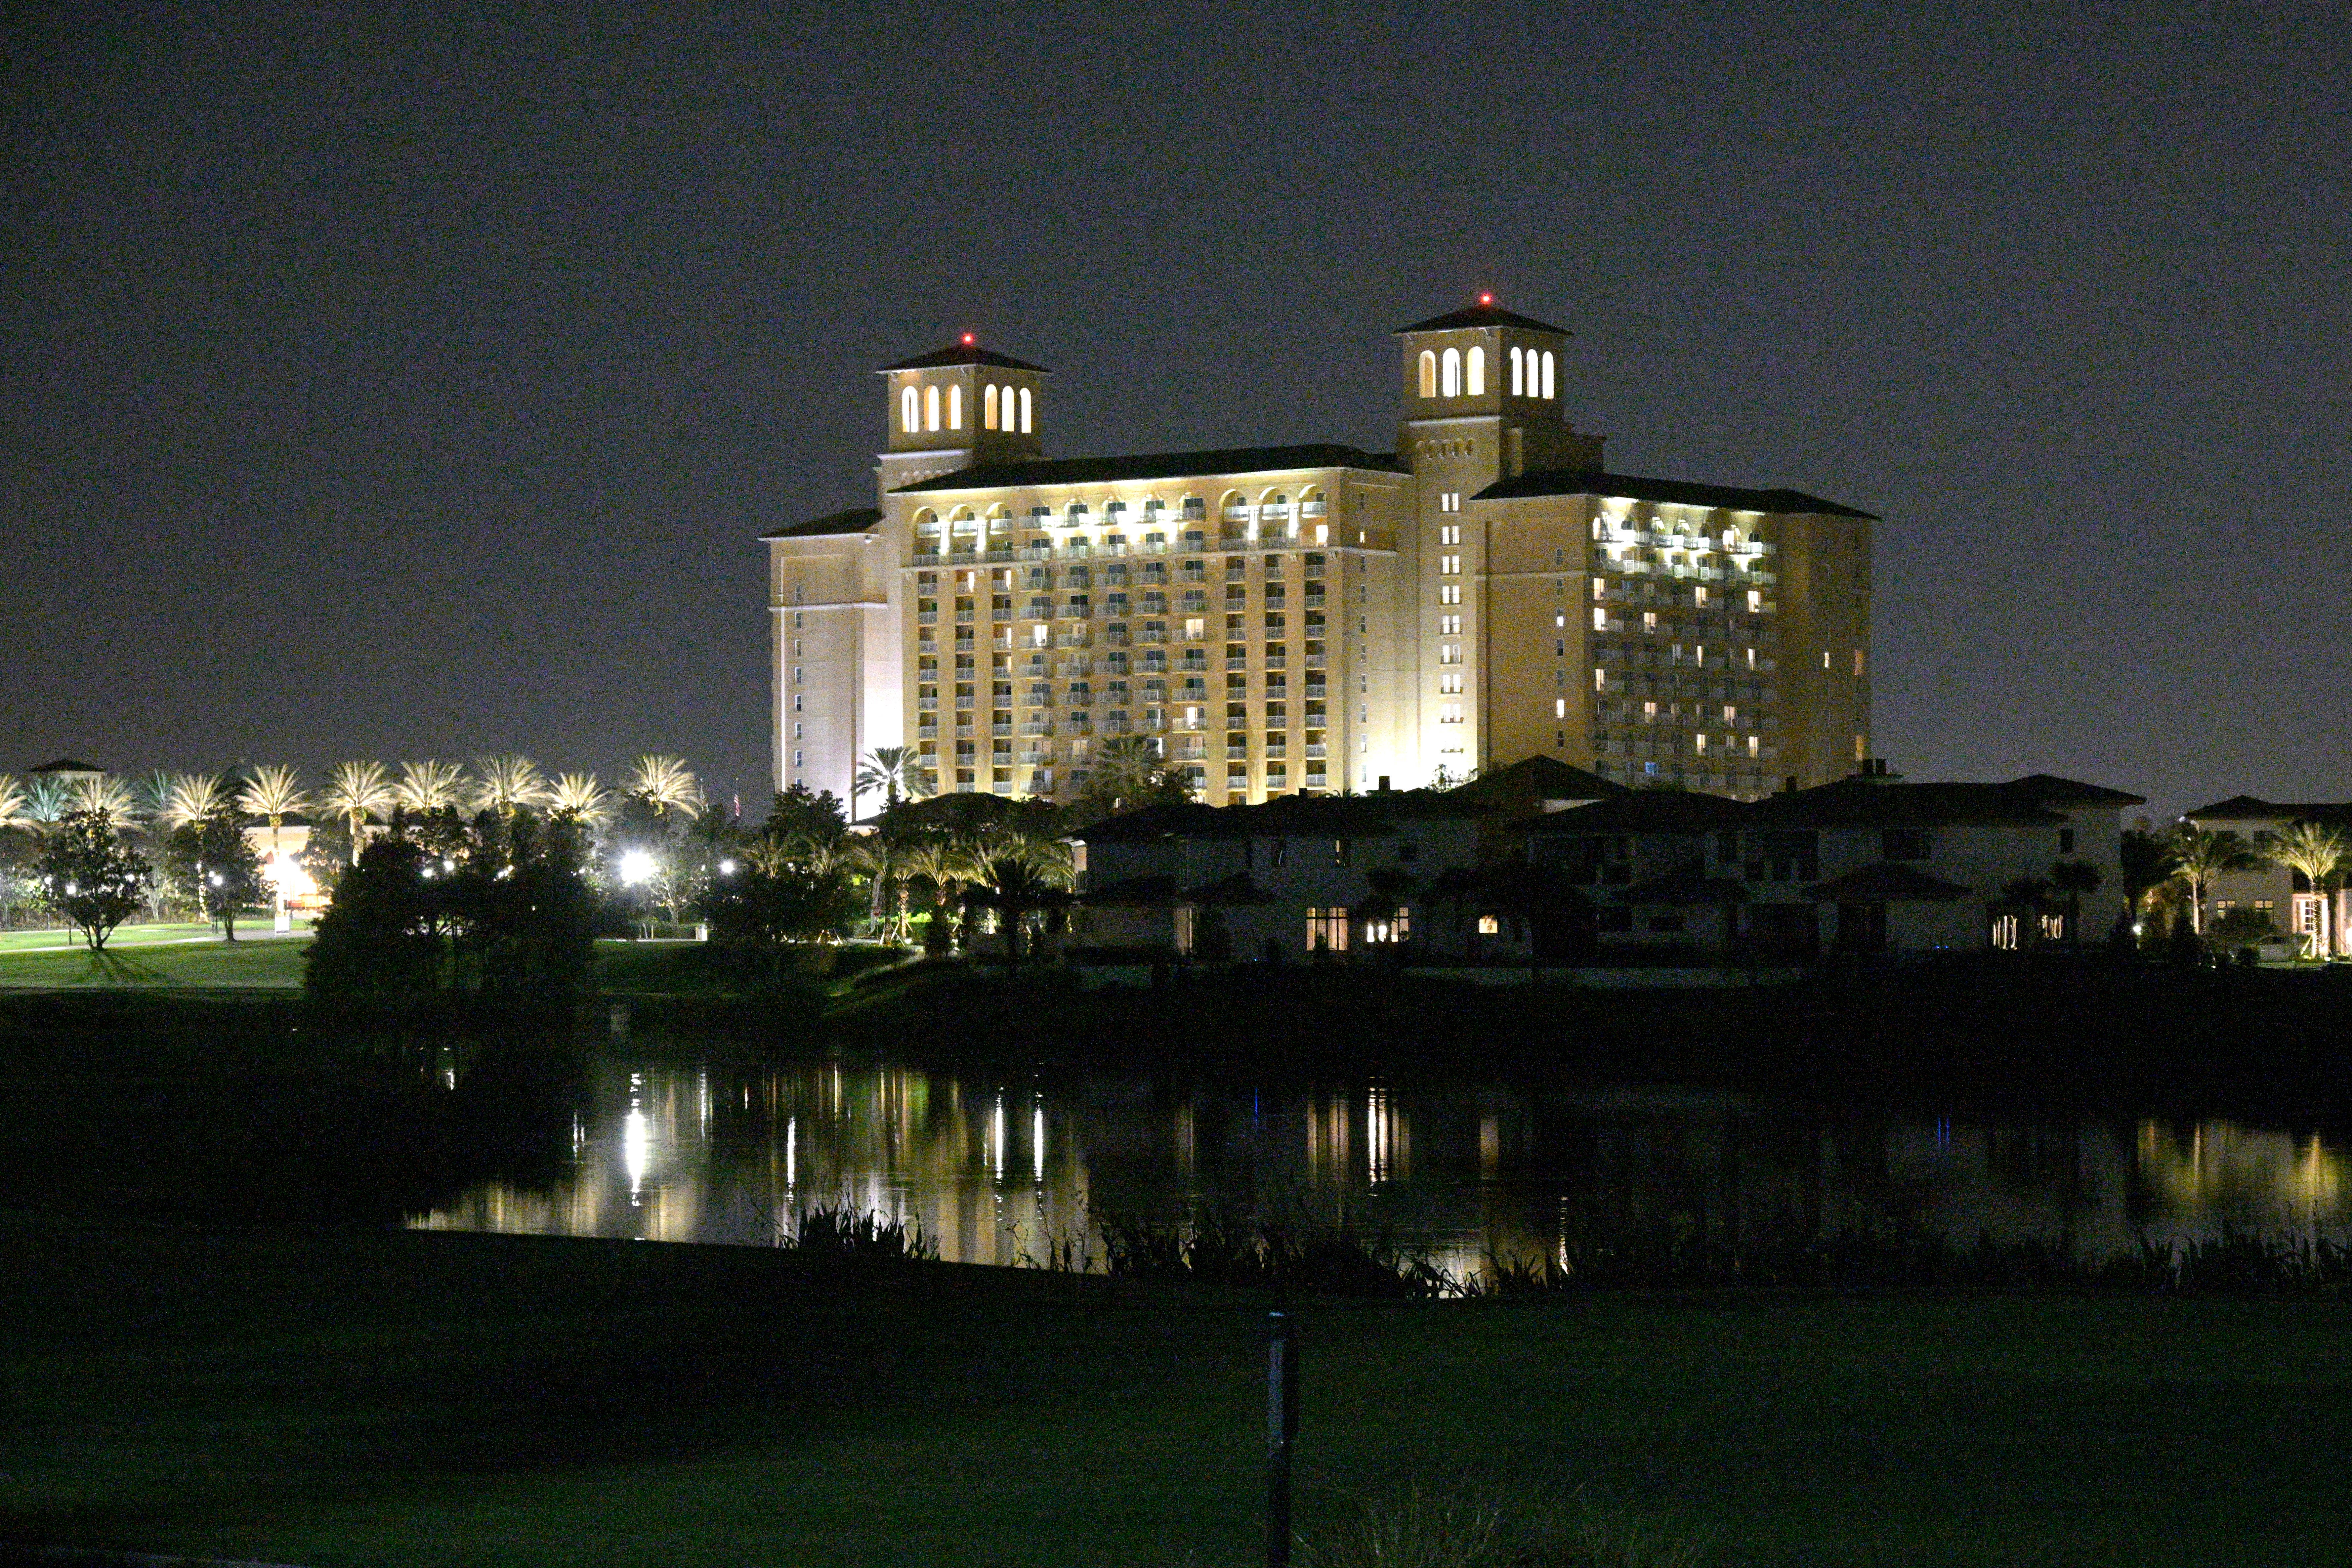 The Ritz-Carlton Orlando, Grande Lakes resort hotel, right, is viewed where actor and comedian Bob Saget was found dead, Sunday, Jan. 9, 2022, in Orlando, Fla.